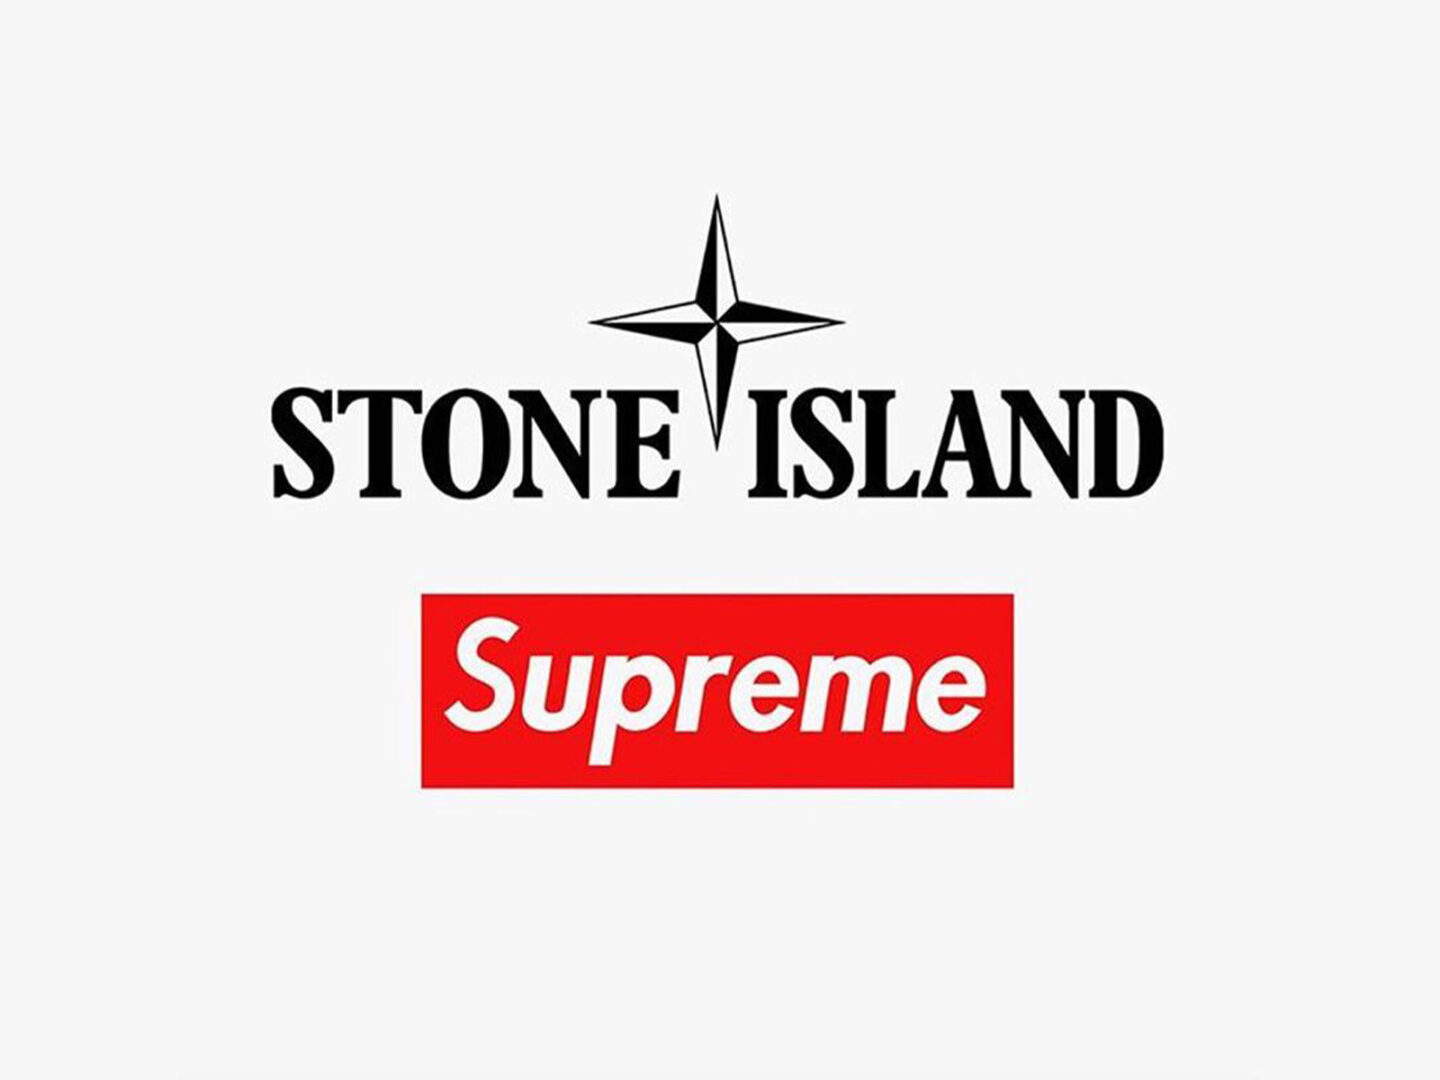 Images leak of possible eighth instalment of Supreme and Stone Island